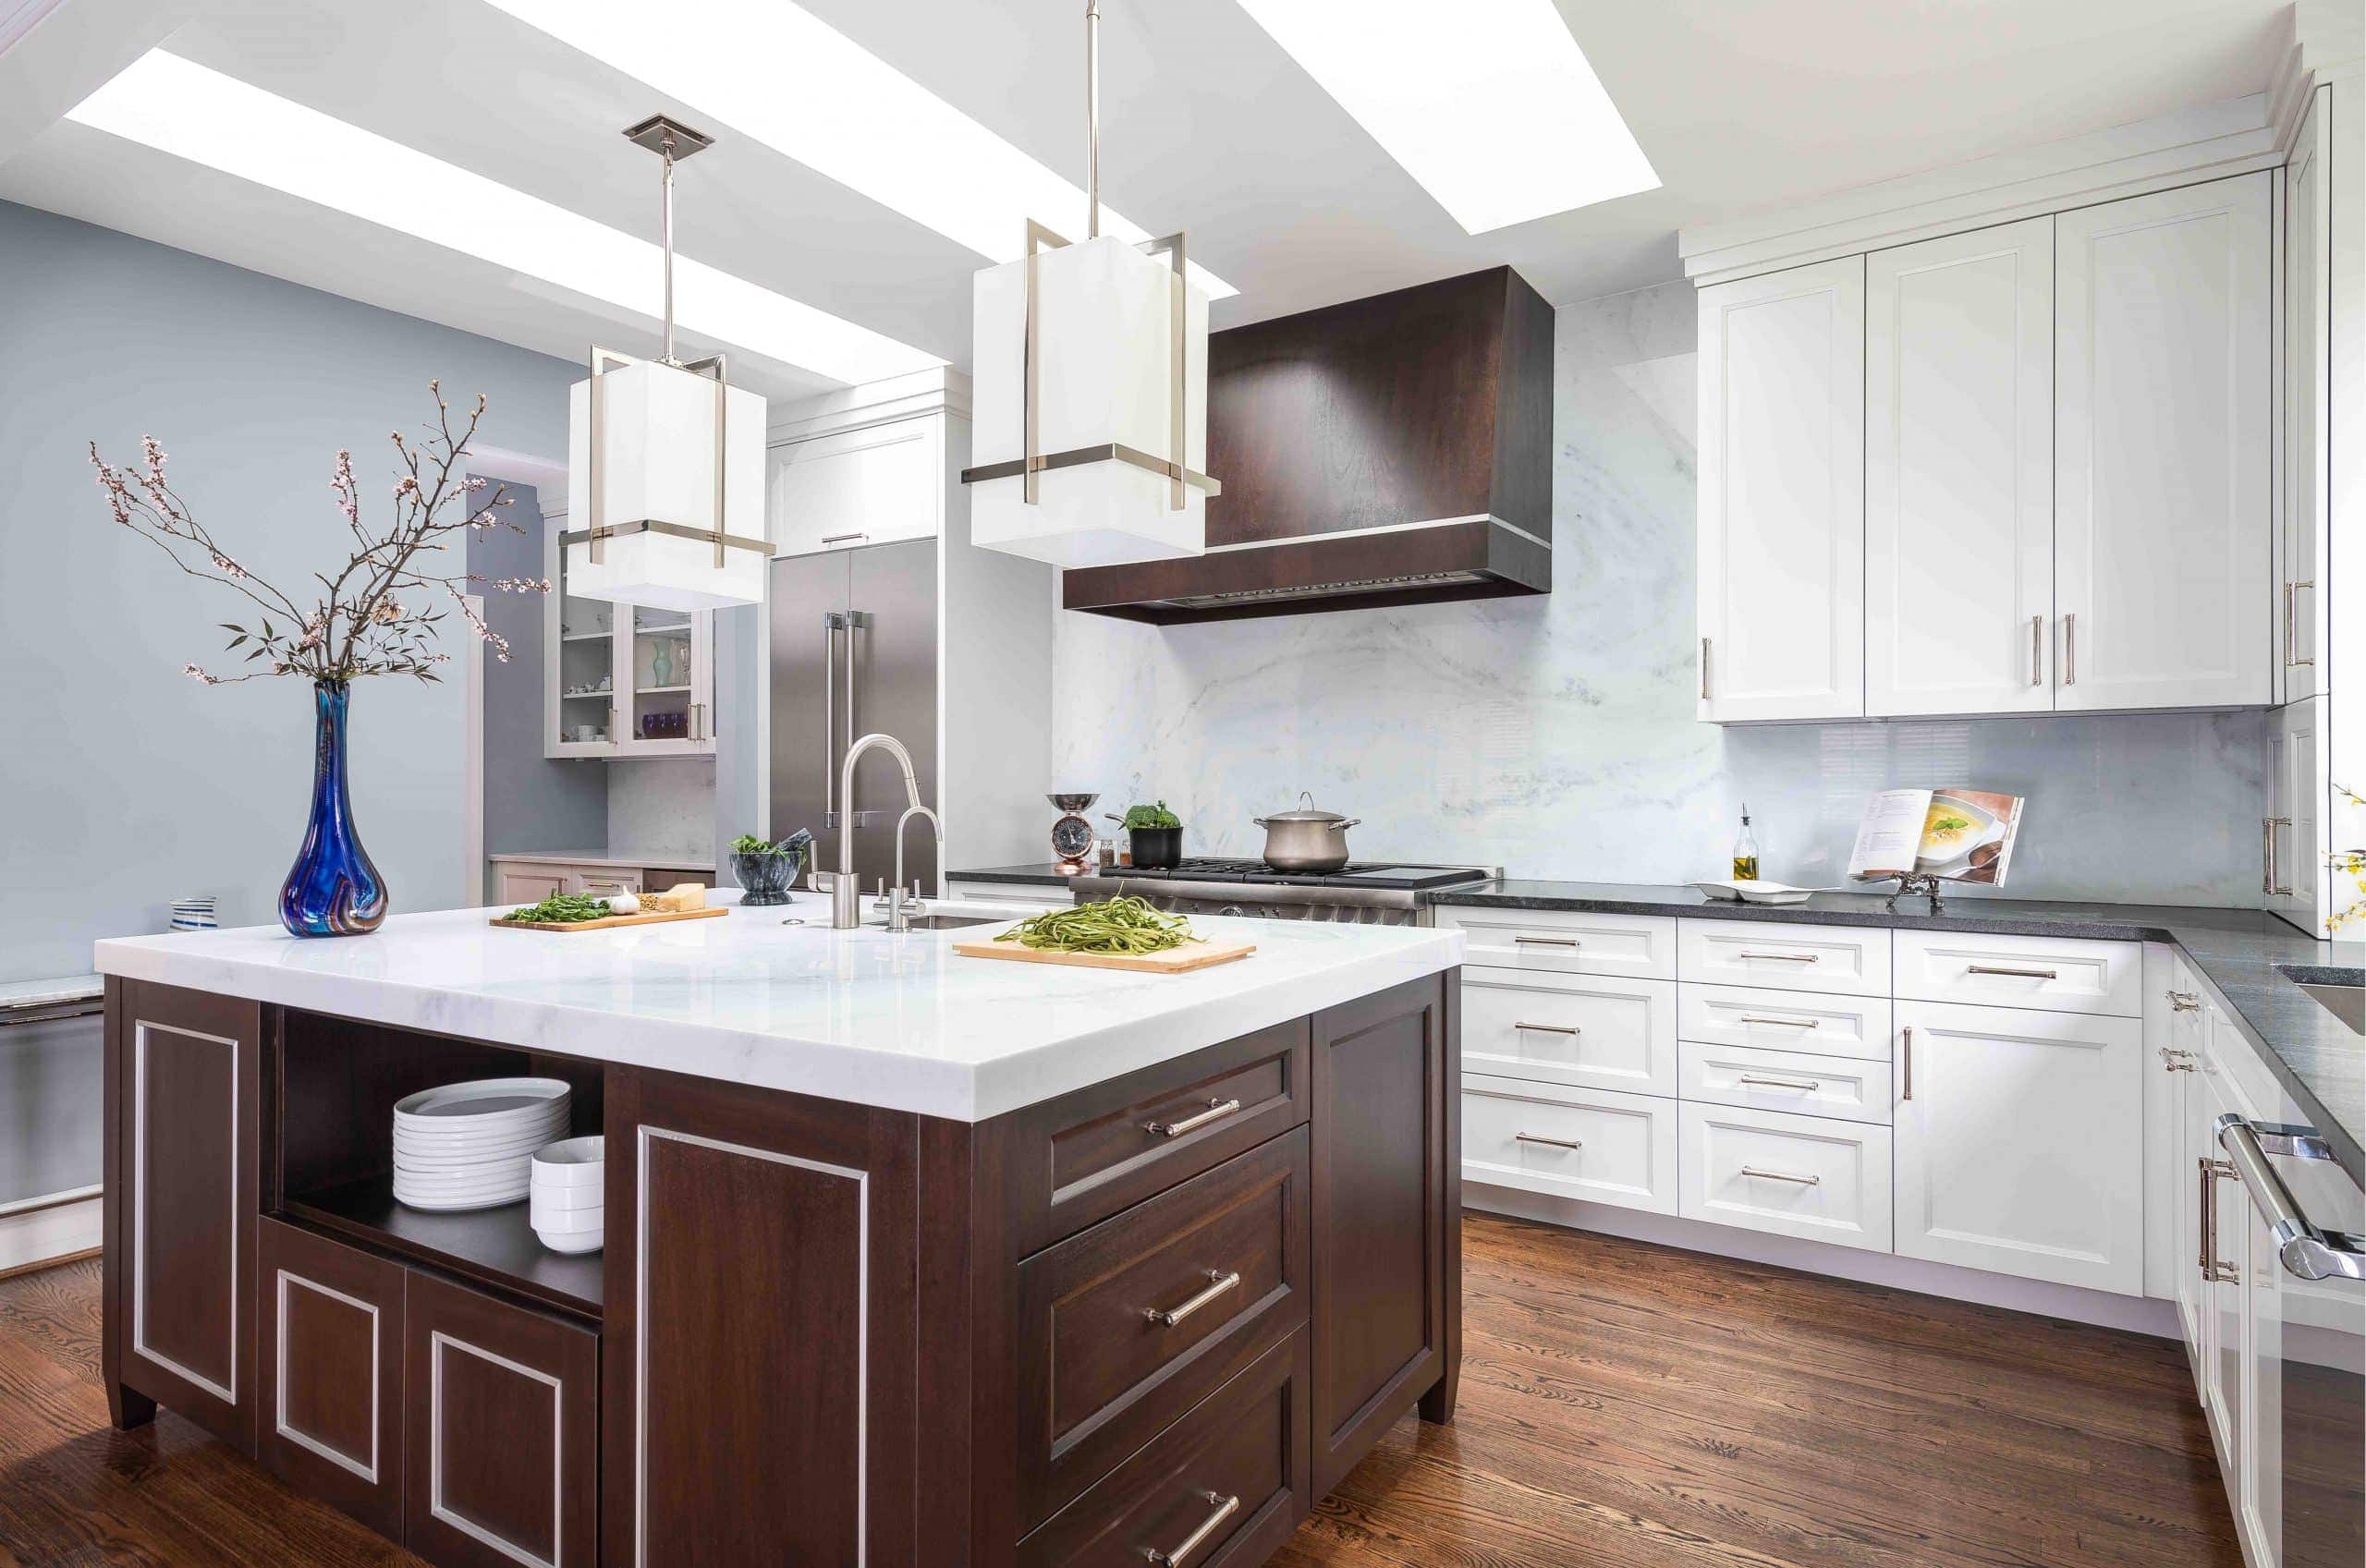 Work with the experts at Jennifer Gilmer Kitchen & Bath, Kitchen Remodeling in Virginia